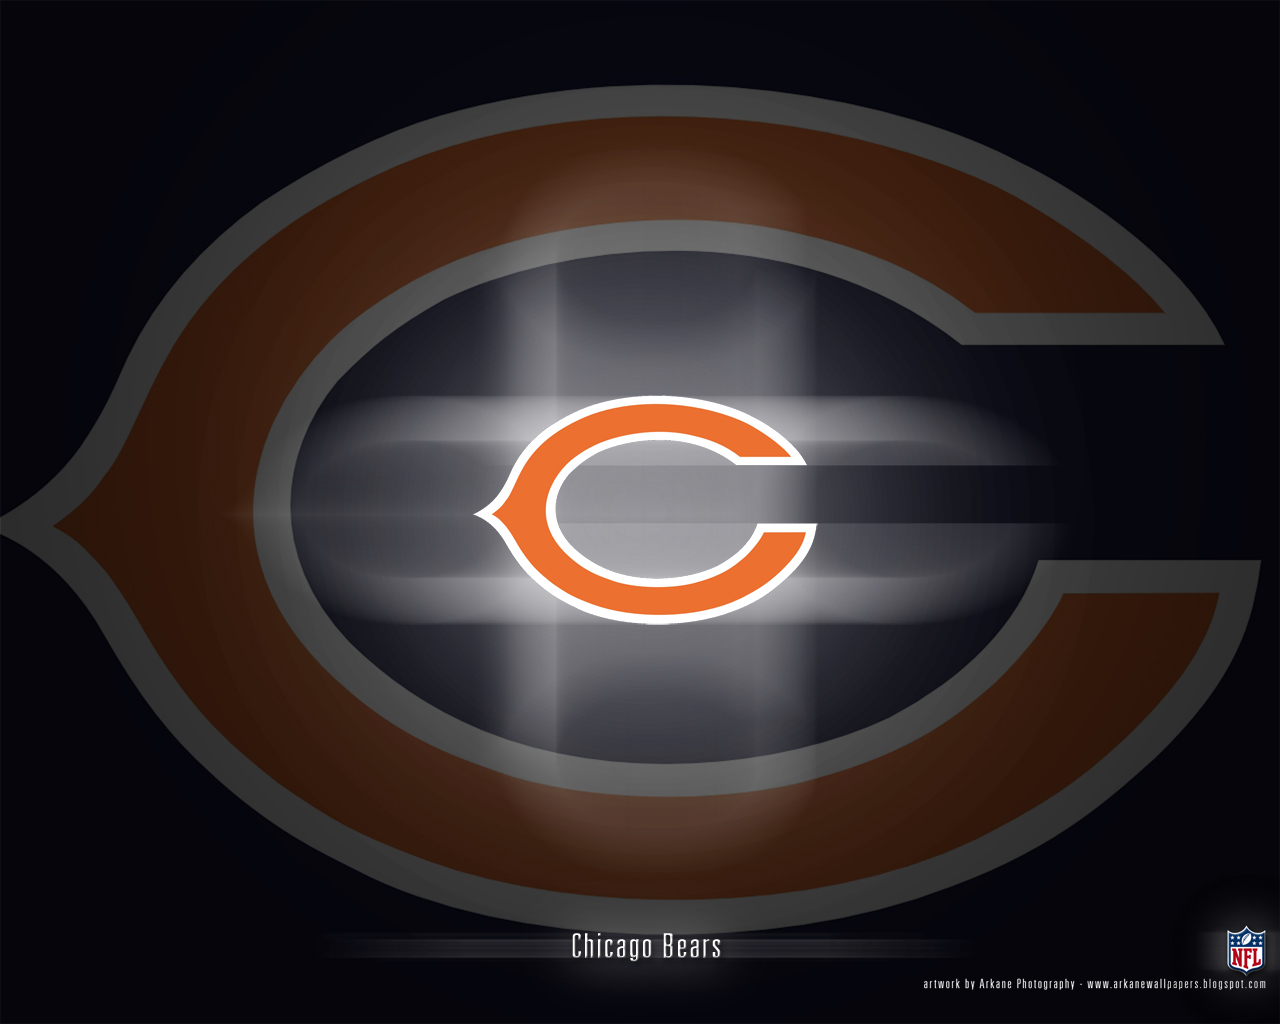 Chicago Bears wallpaper HD images Chicago Bears wallpapers 1280x1024